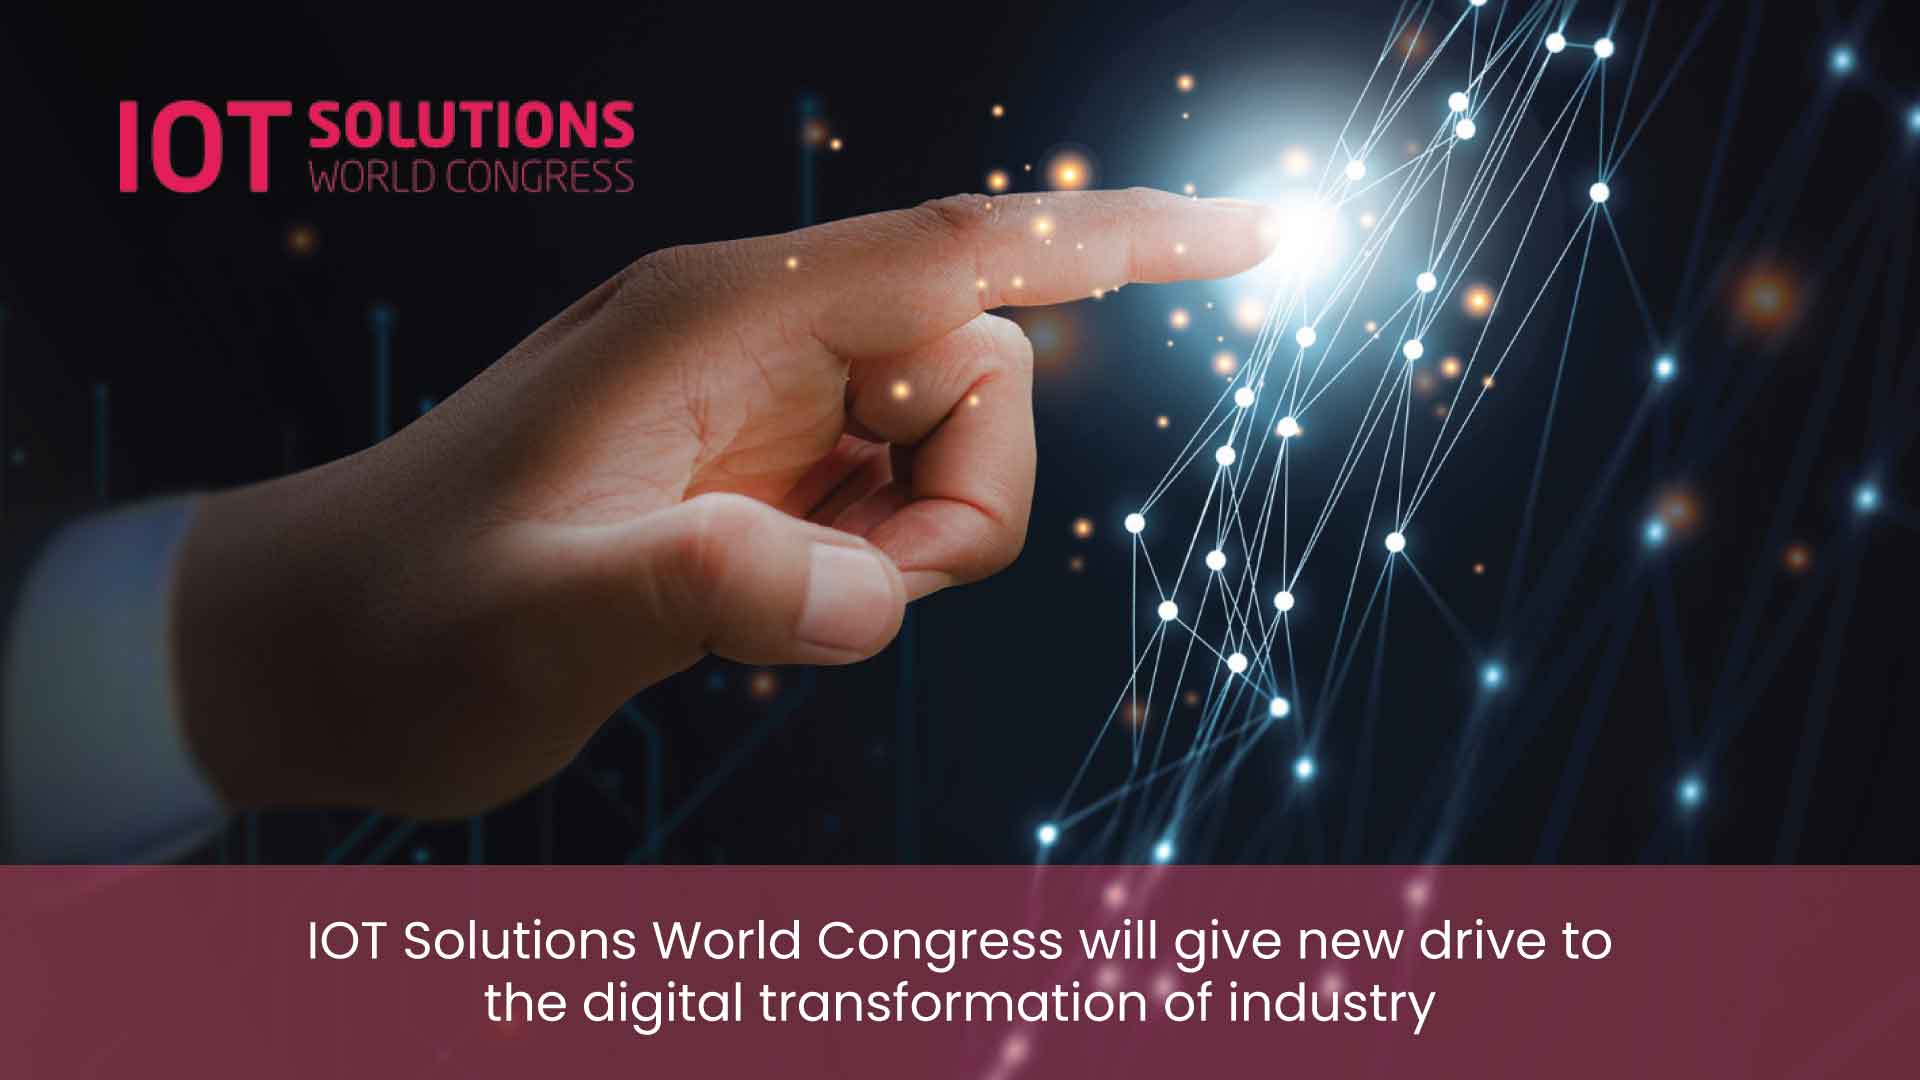 IOT Solutions World Congress will give new drive to the digital transformation of industry